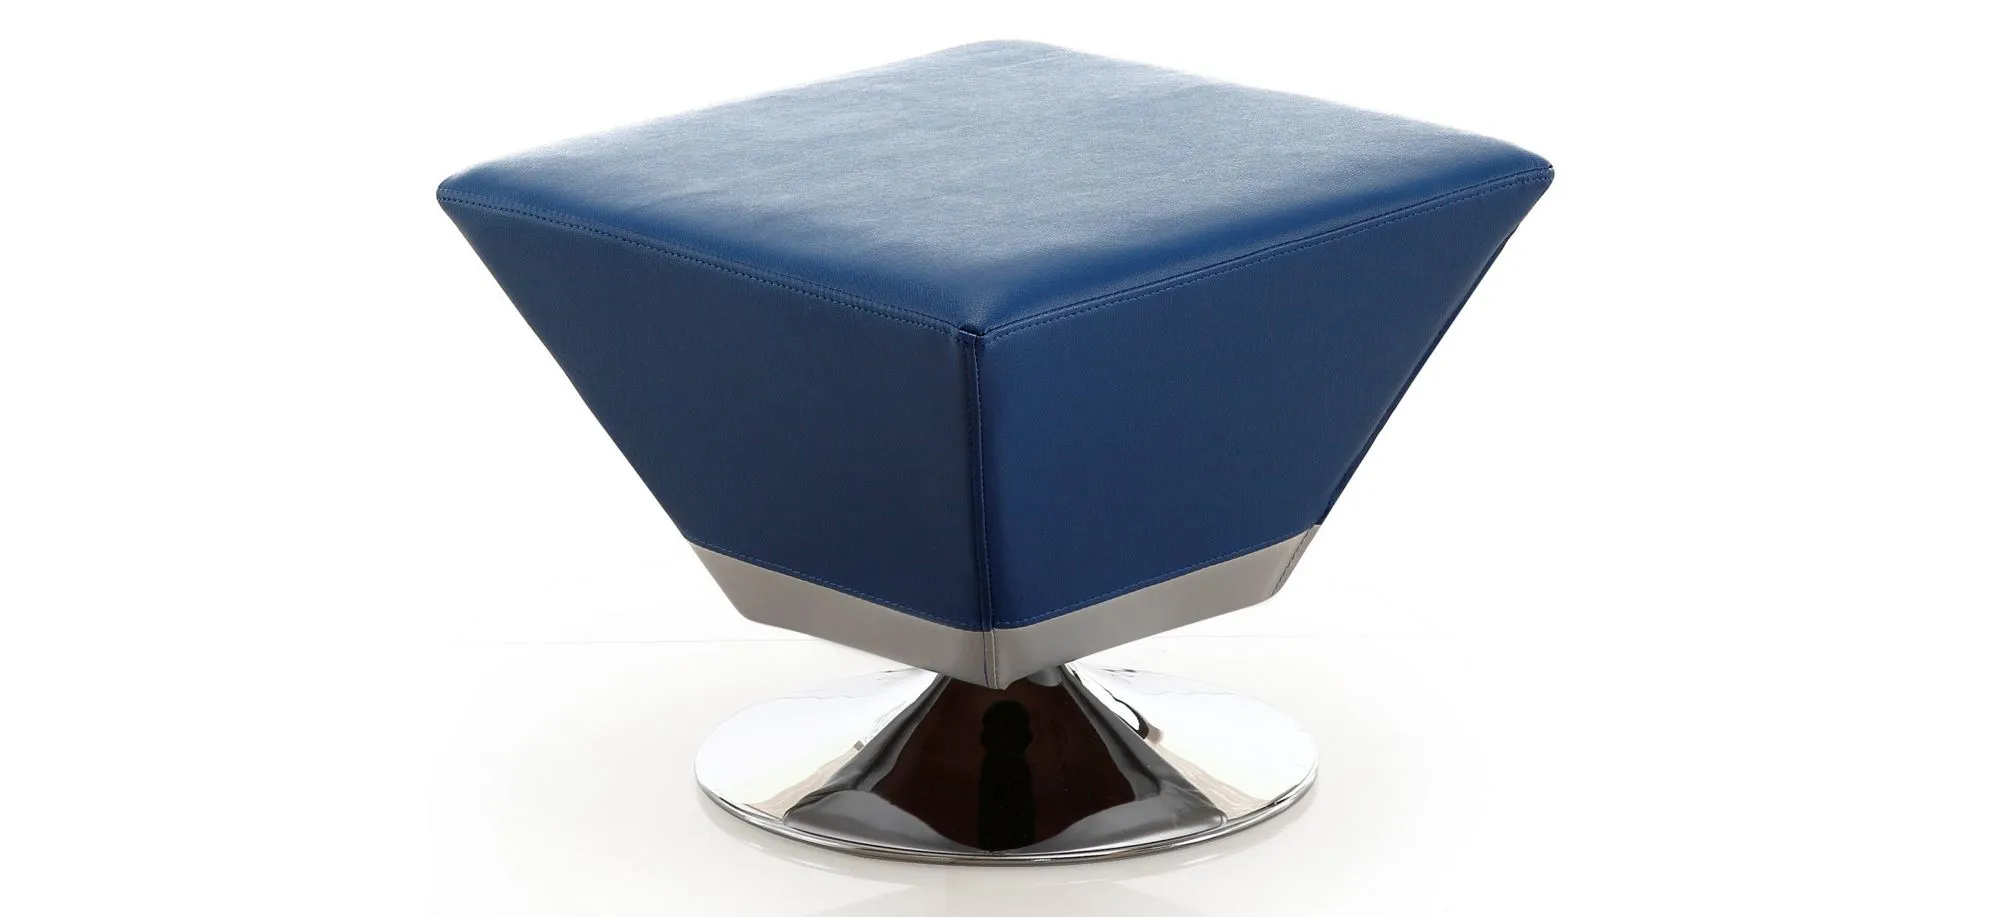 Diamond Swivel Ottoman in Blue and Polished Chrome by Manhattan Comfort